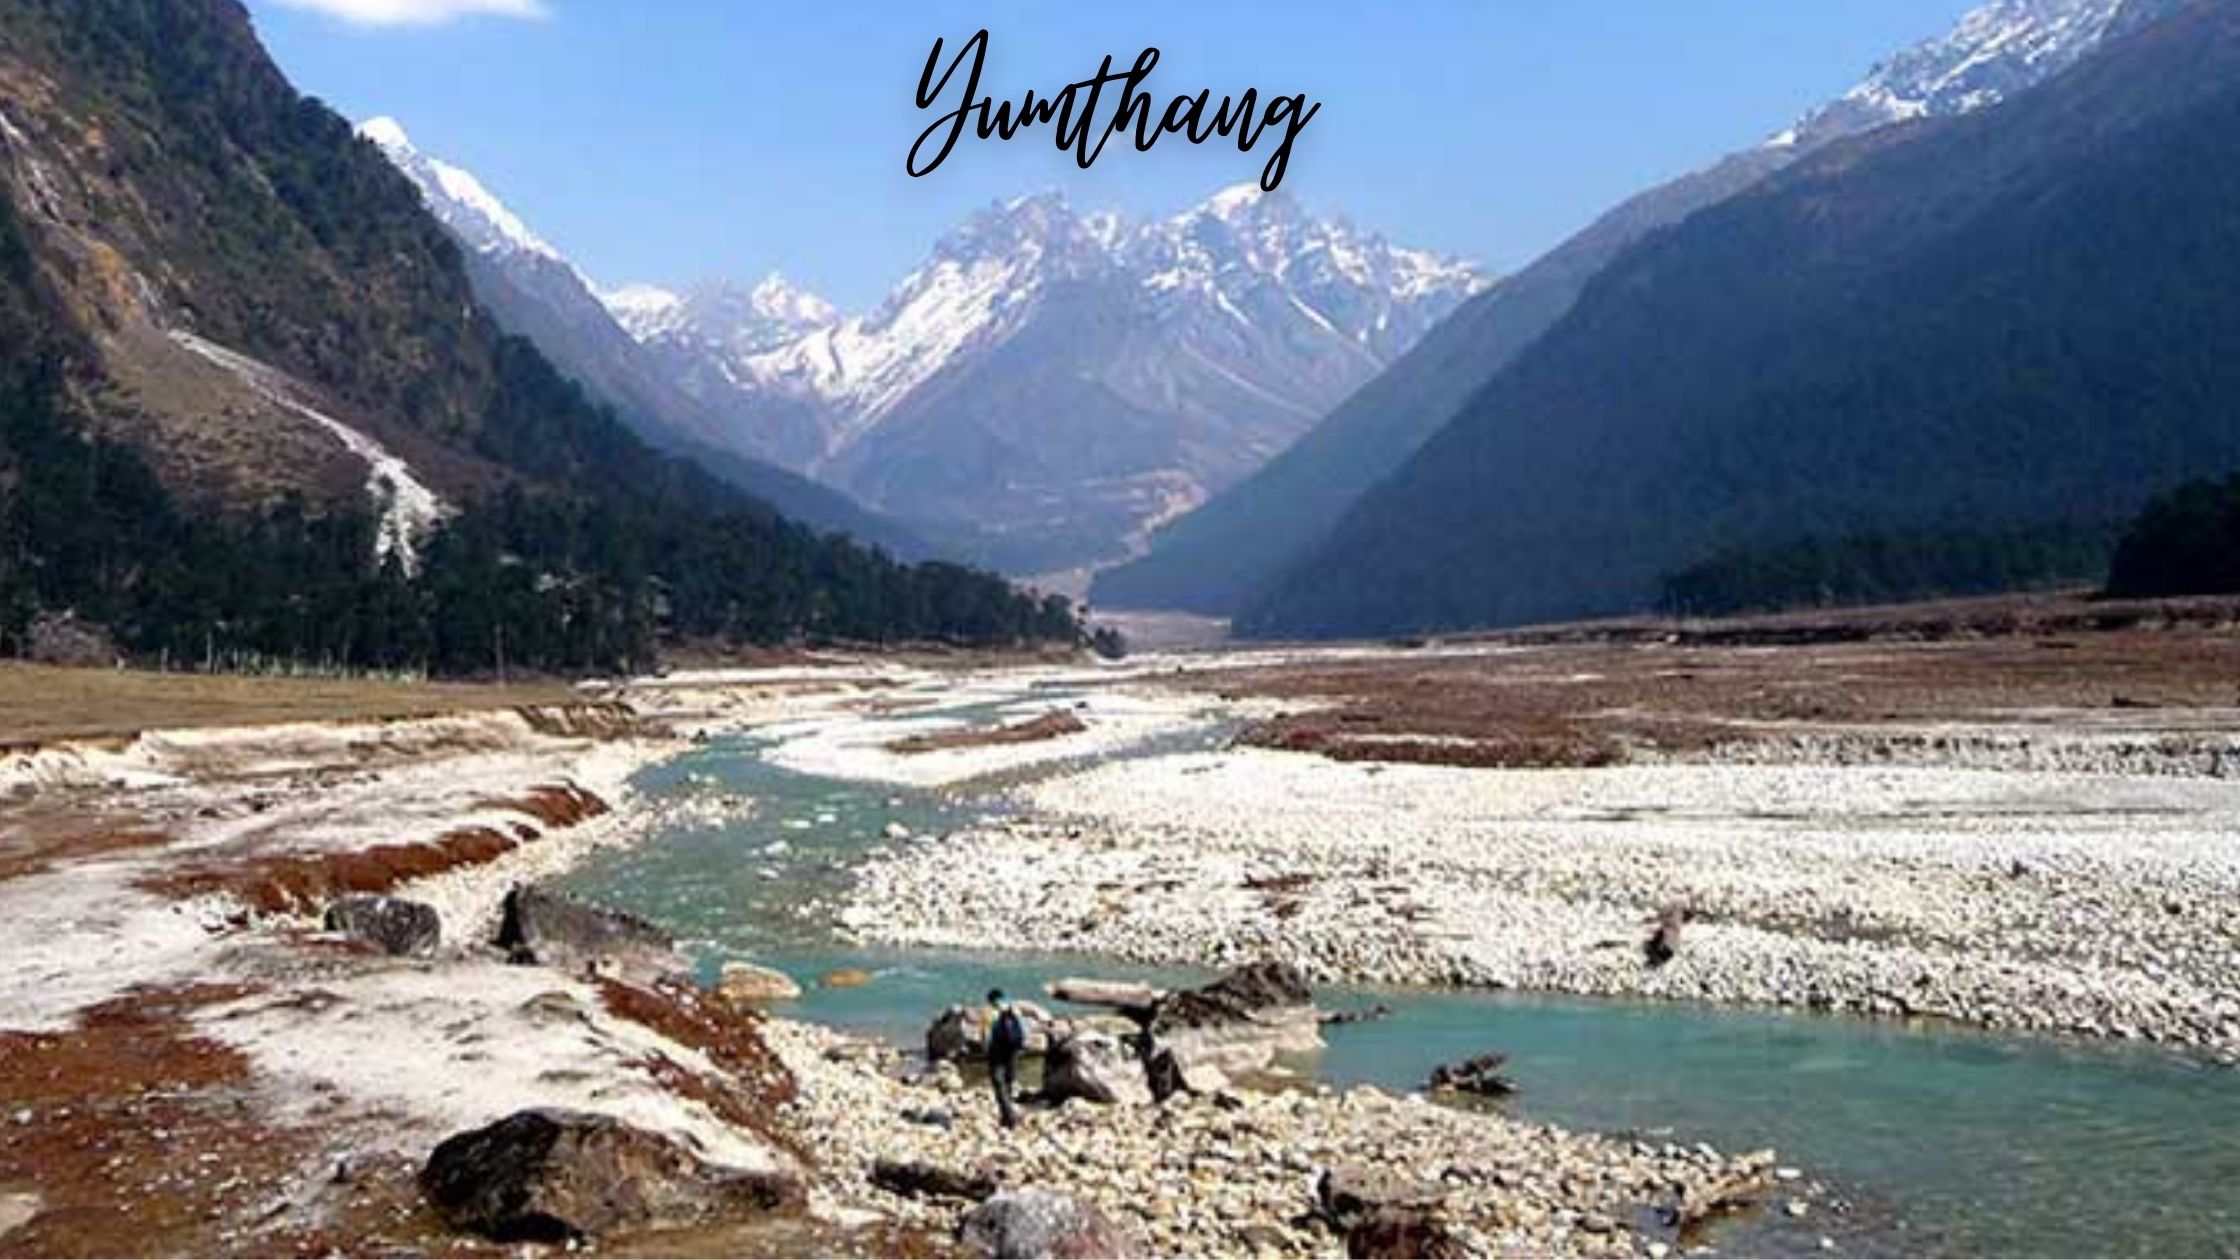 Yumthang - Snowy Honeymoon Destinations in India